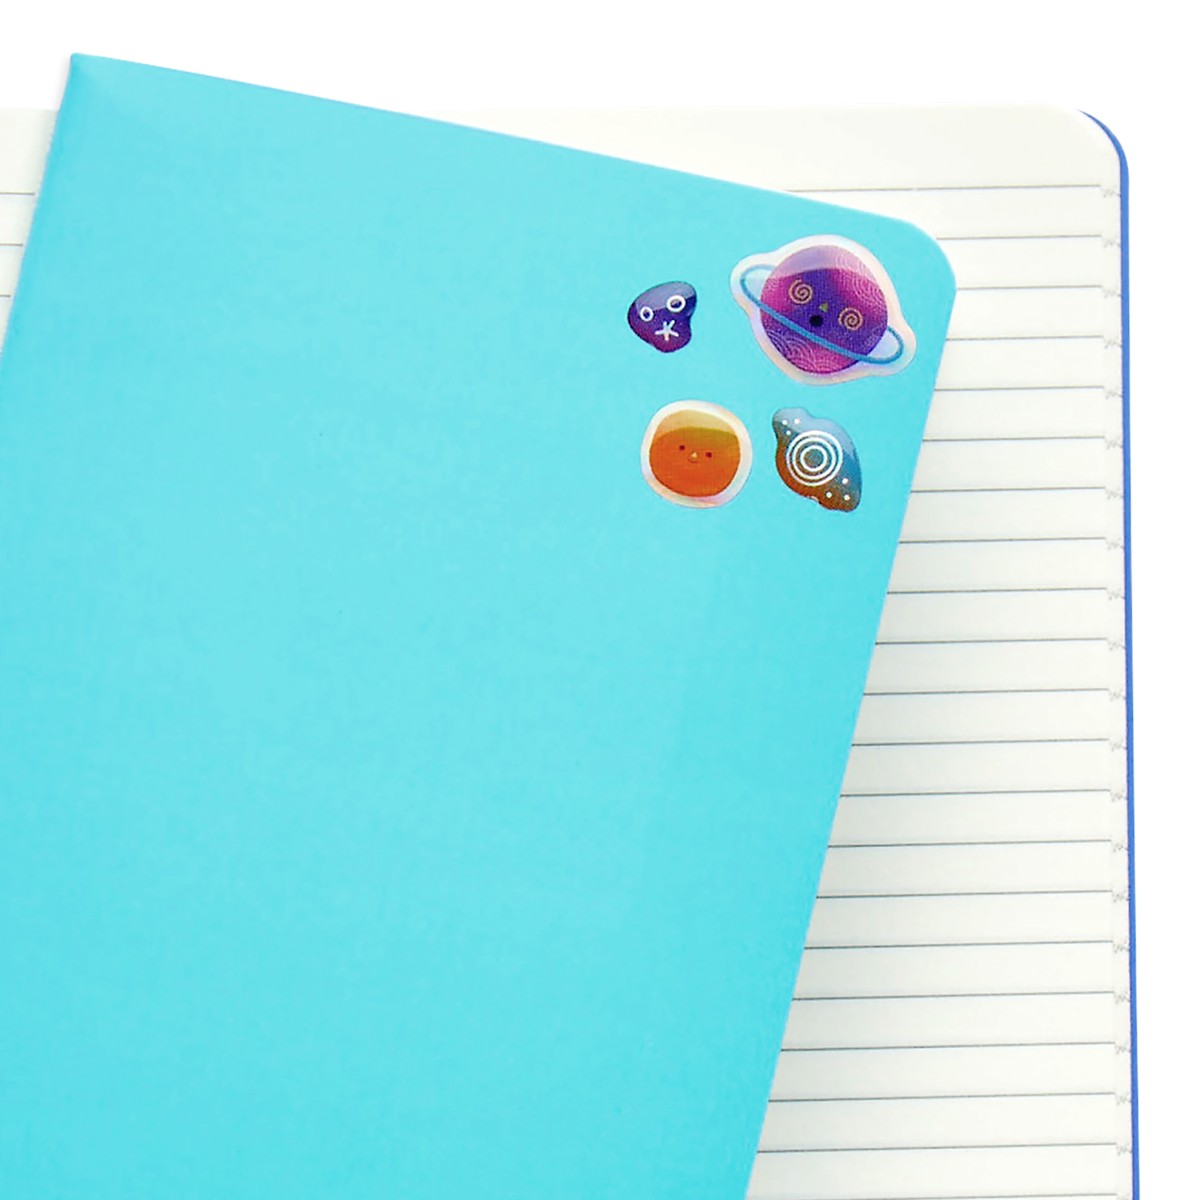 Stickiville Planet Pals stickers on blue notepad